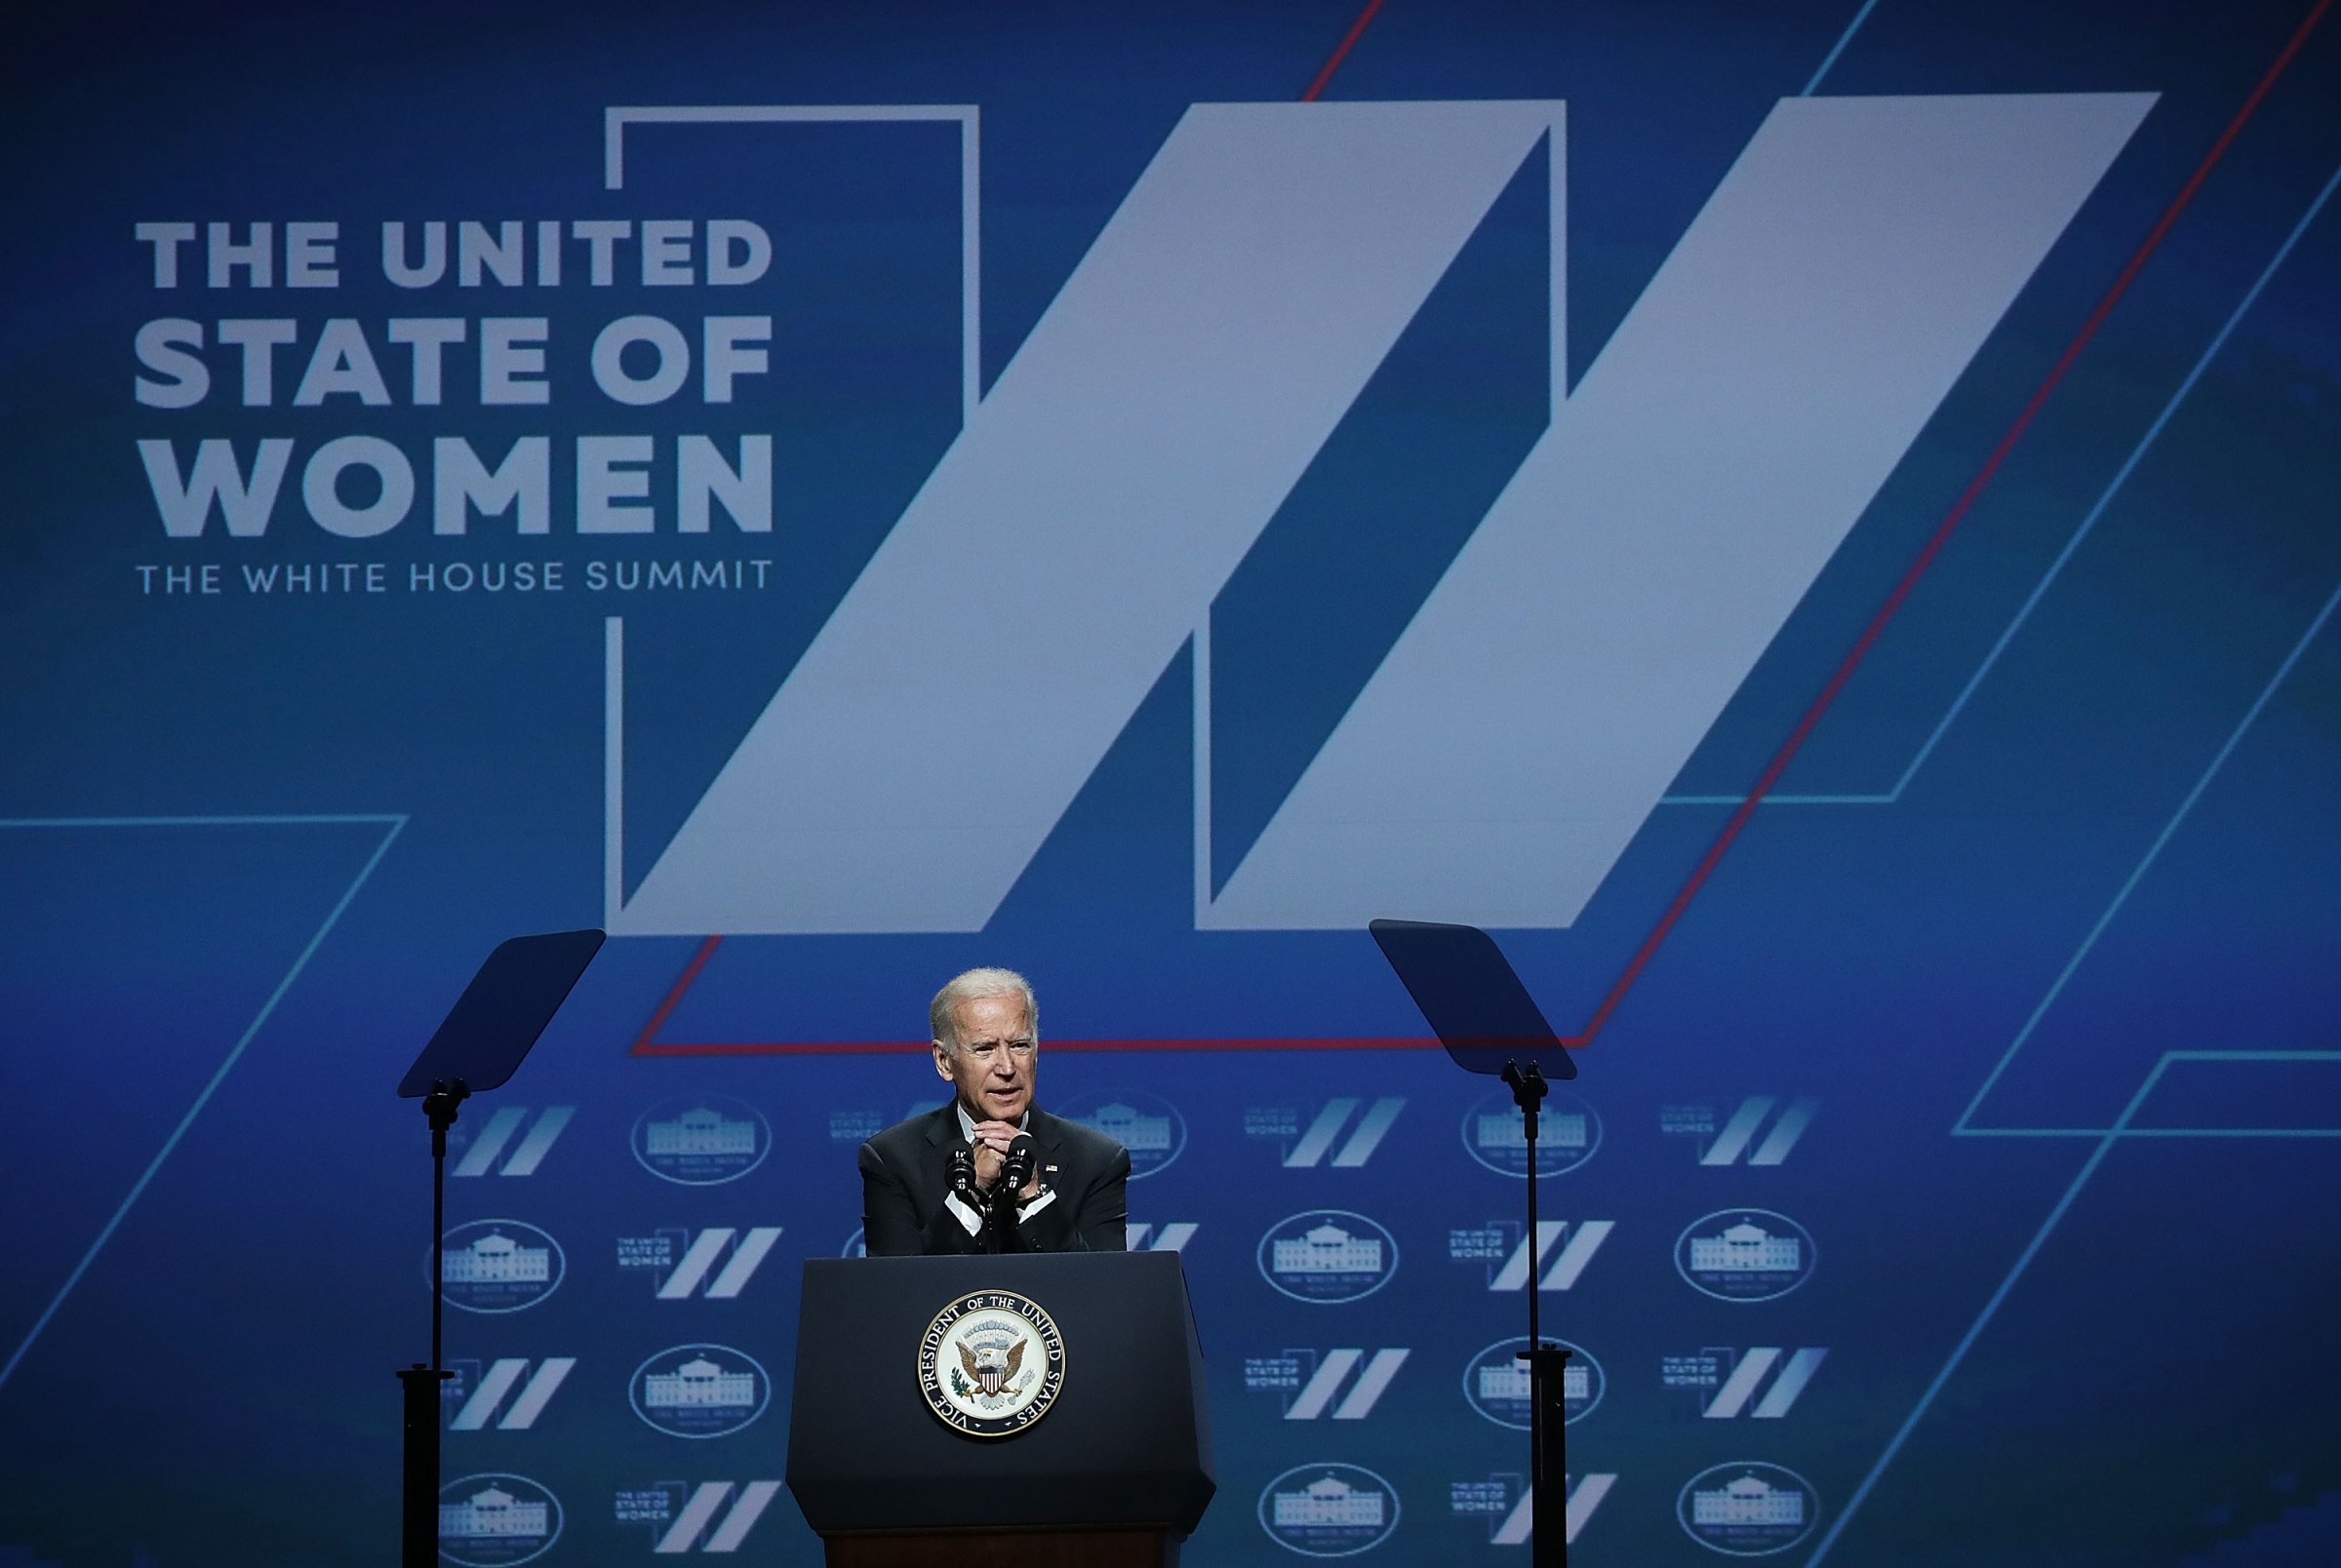 The White House Council On Women And Girls Hosts The "United State Of Women" Summit In D.C.